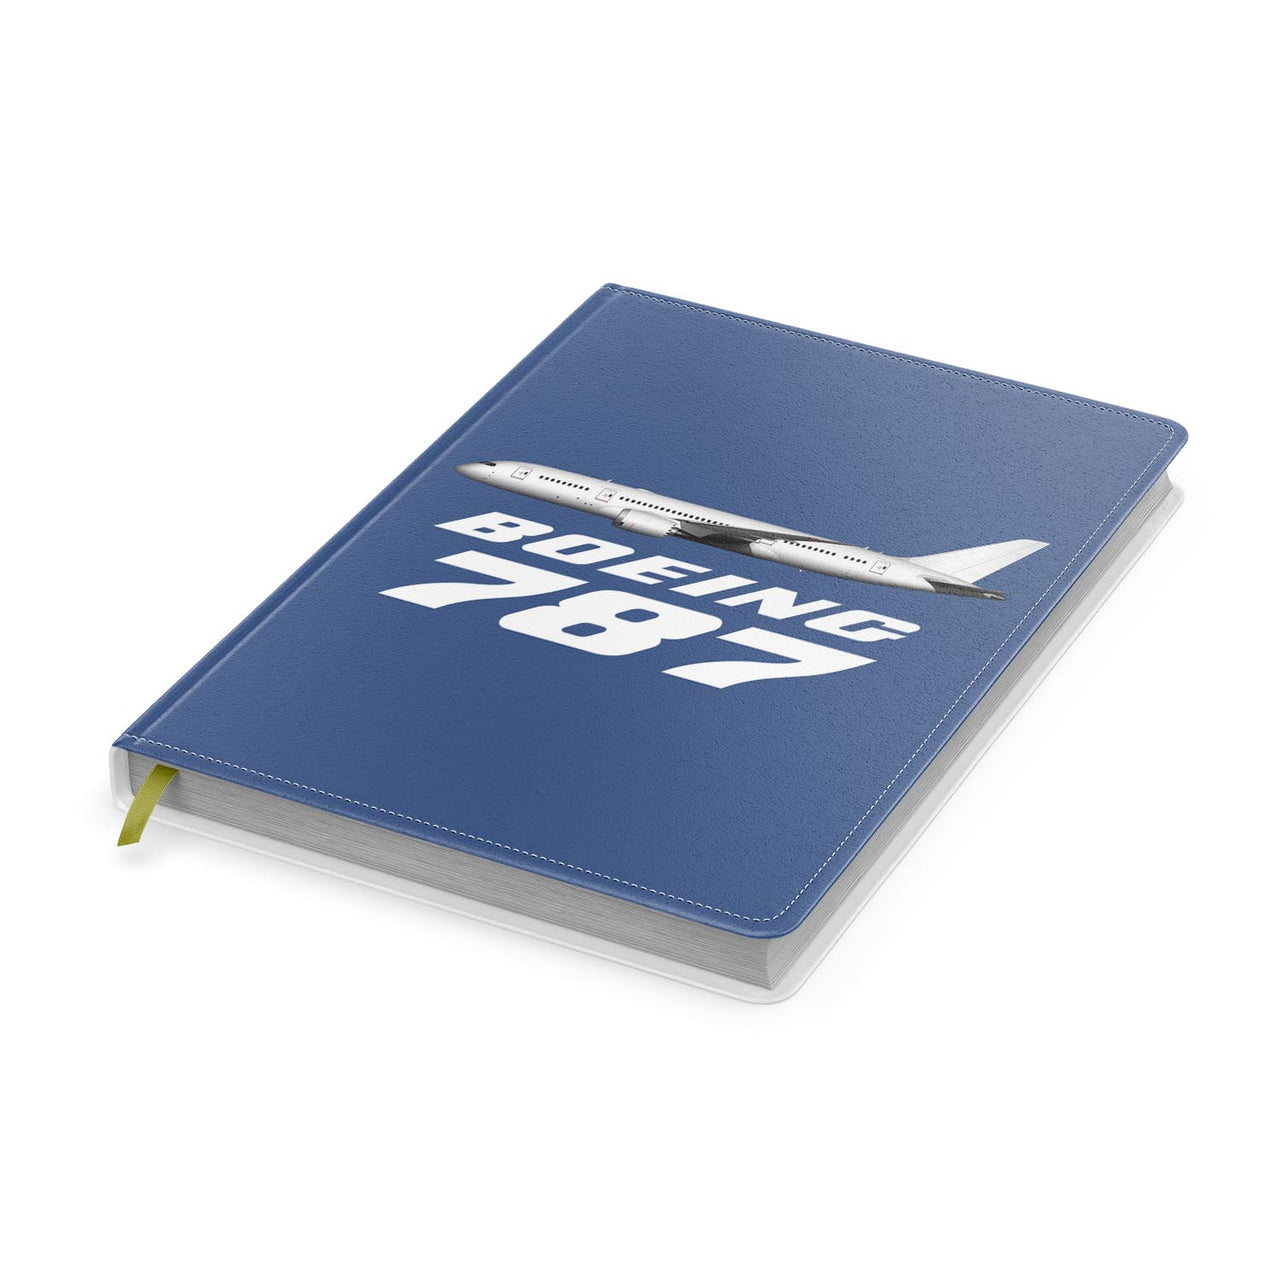 The Boeing 787 Designed Notebooks